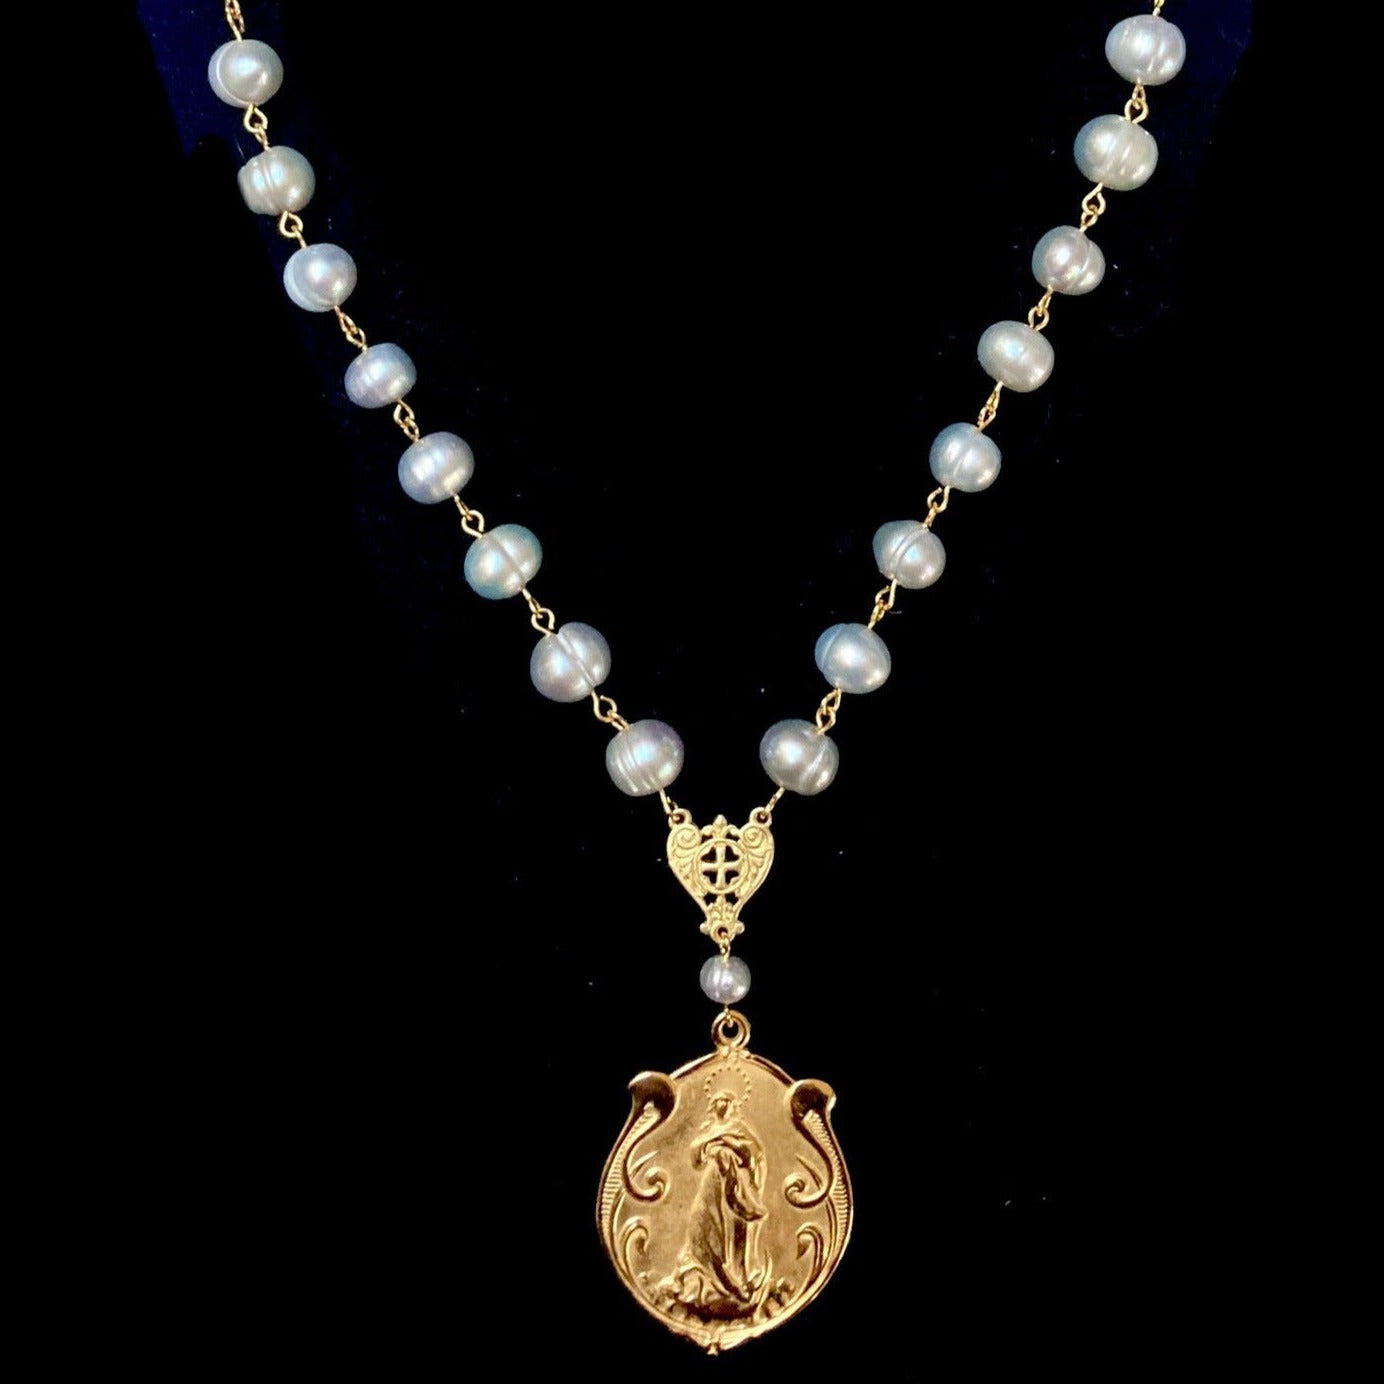 Moonglow Art Nouveau Madonna - Silver Freshwater Pearls